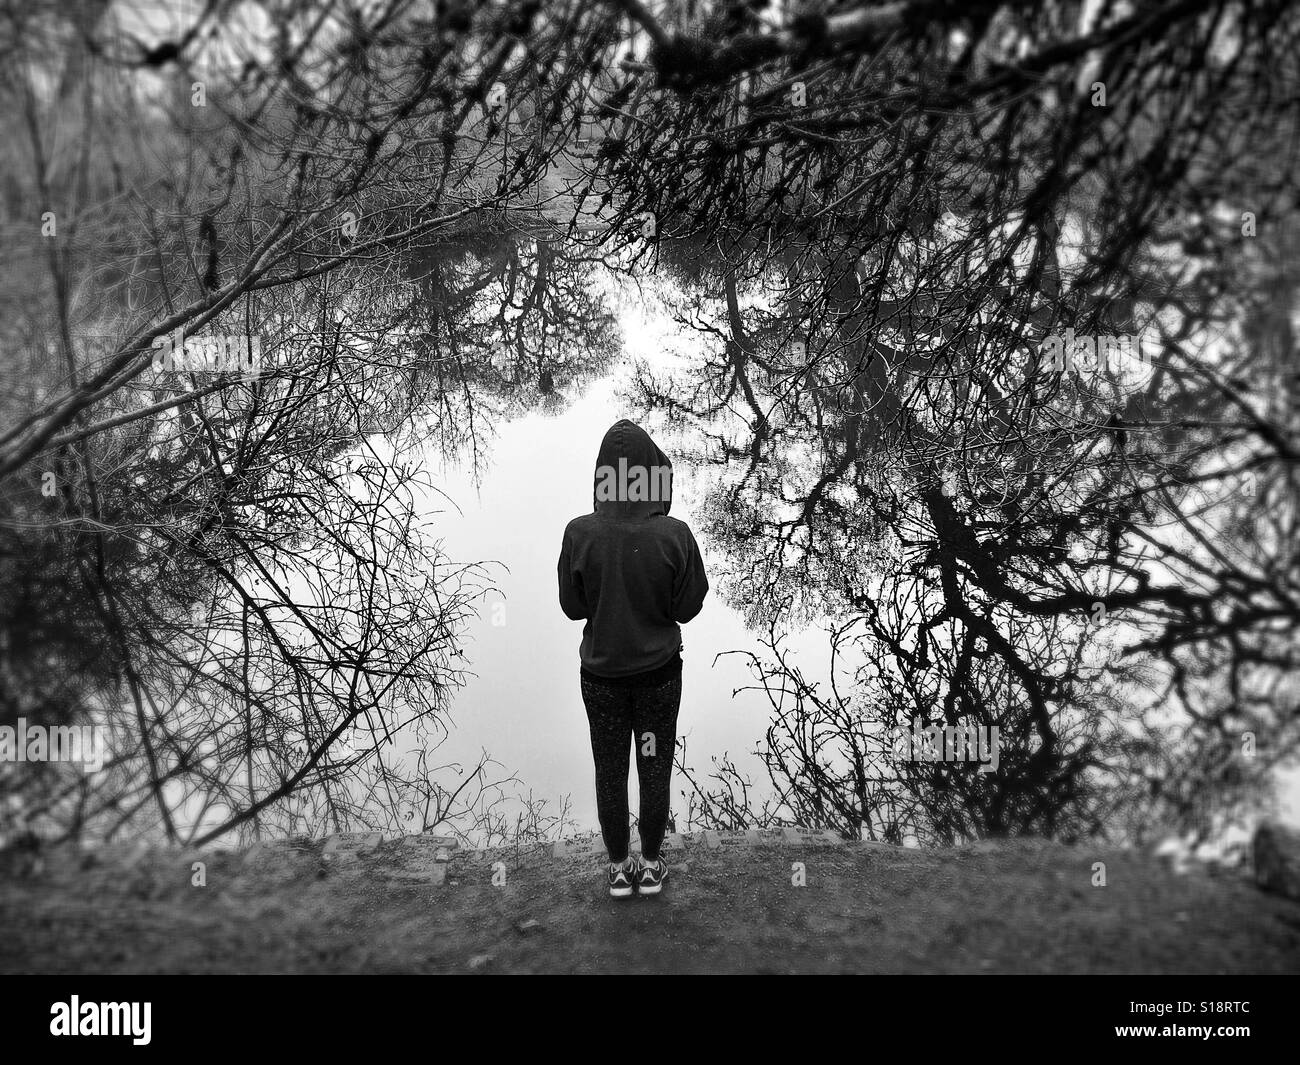 A person in a hoodie as seen from behind, surrounded by branches and looking out at a lake. Stock Photo